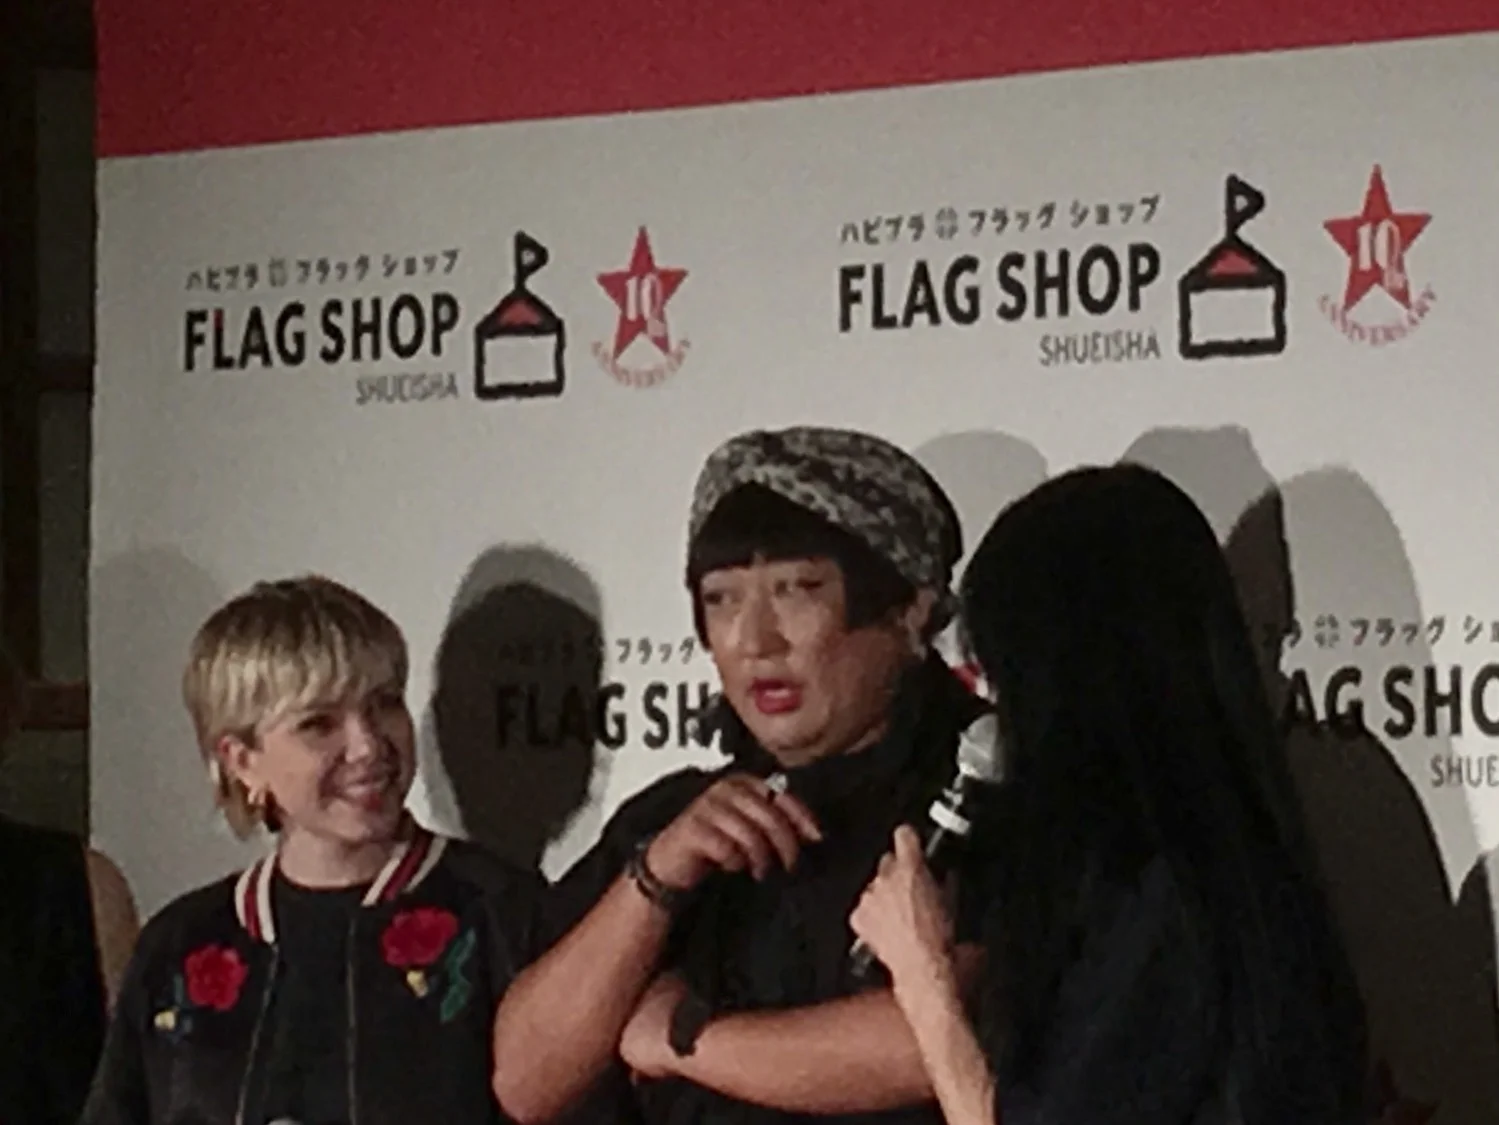 FLAG SHOP 10th anniversary party featuring YOKO and Carly